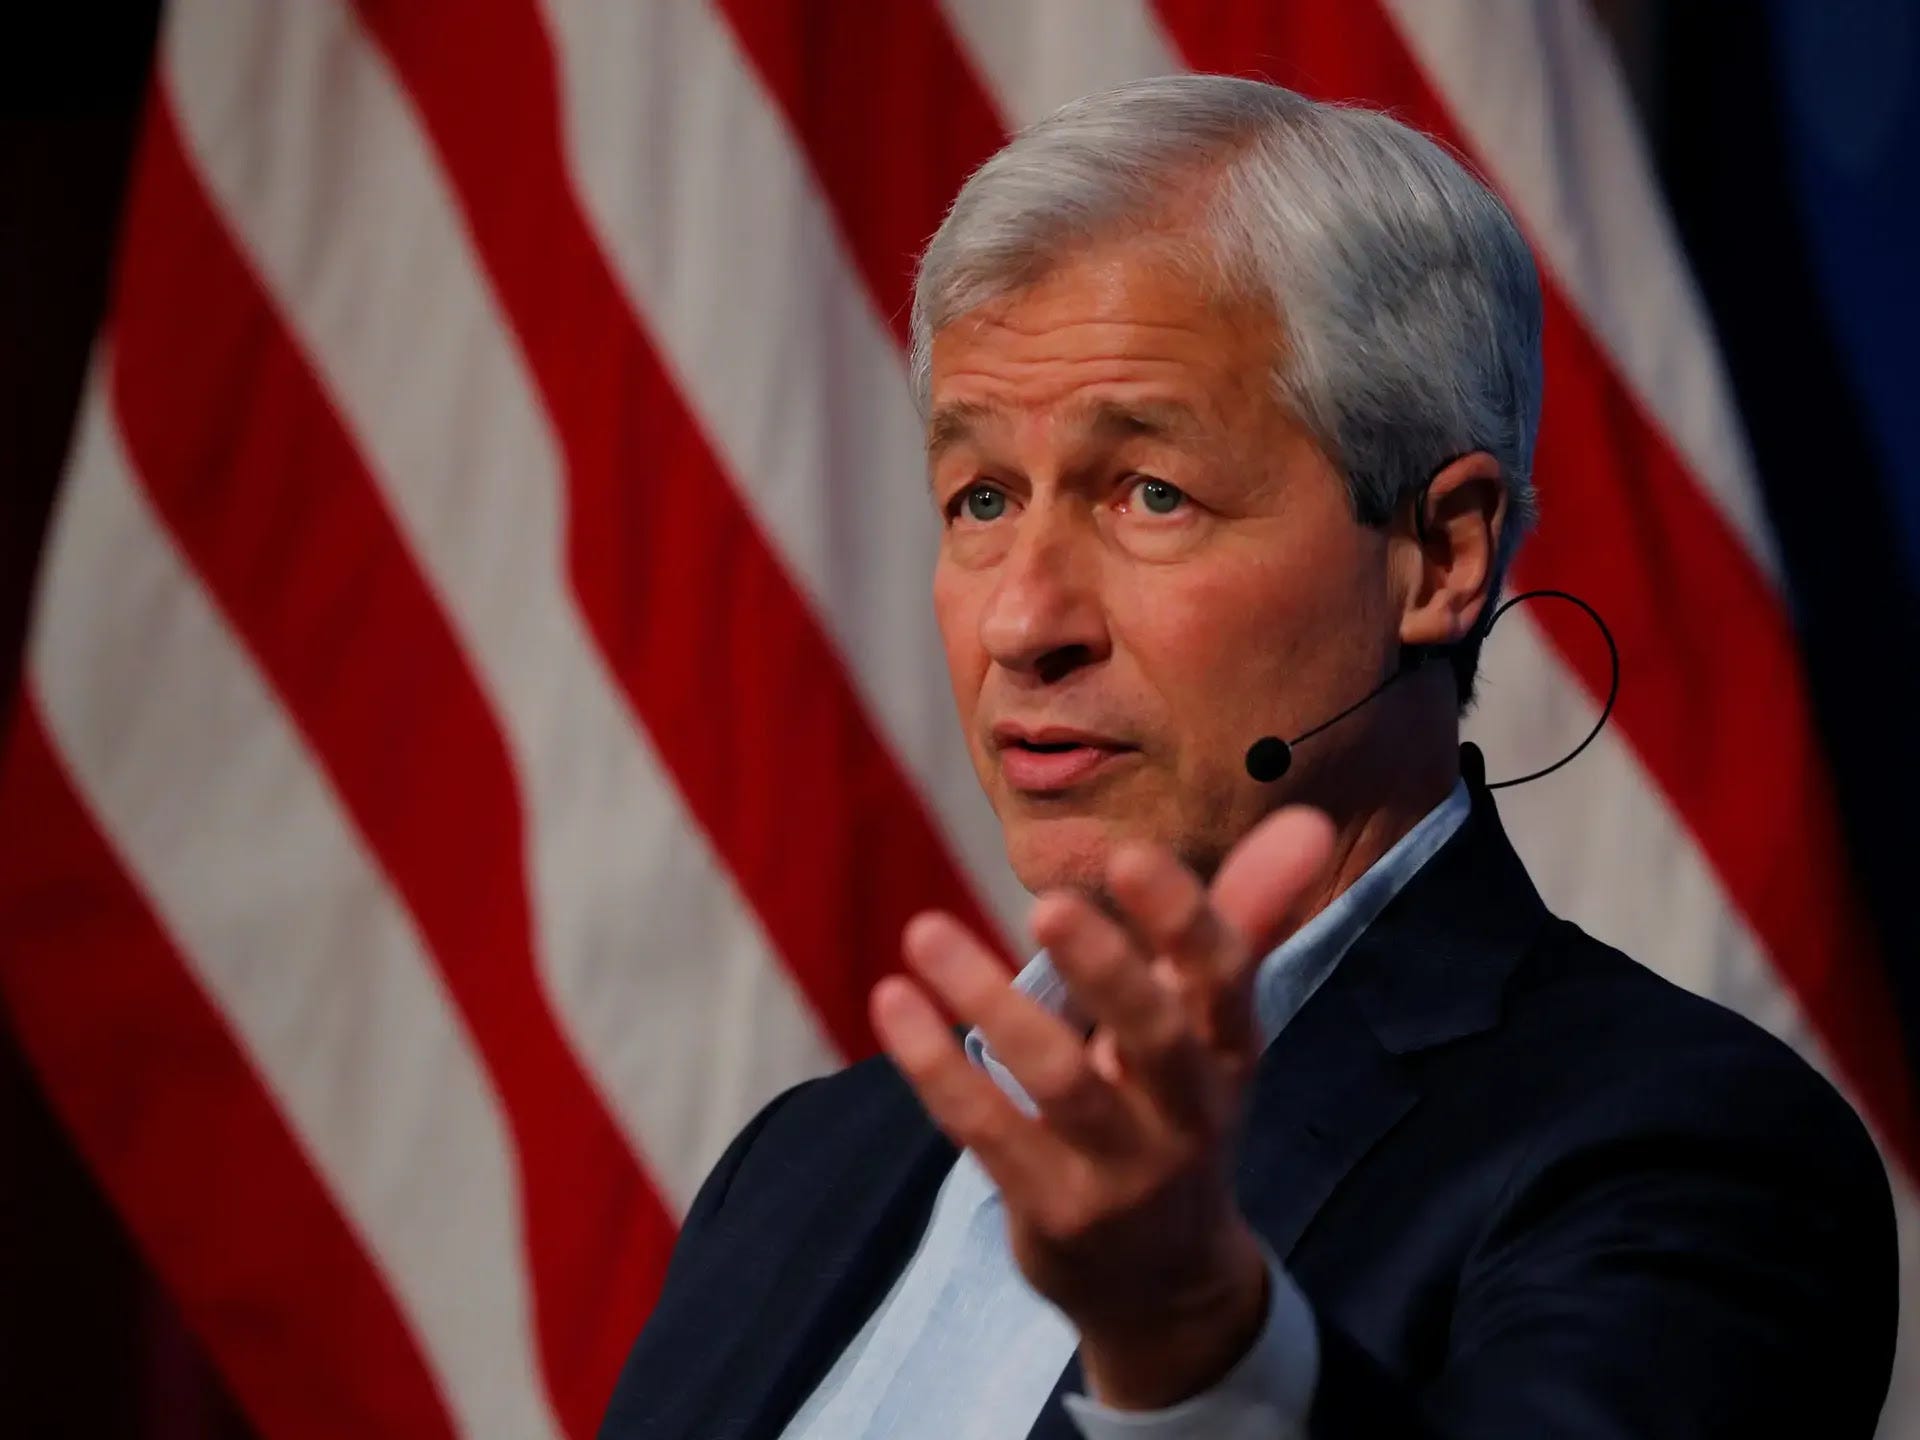 microsoft, jamie dimon says ai will have 'extraordinary' consequences and may be as transformative as electricity and the internet